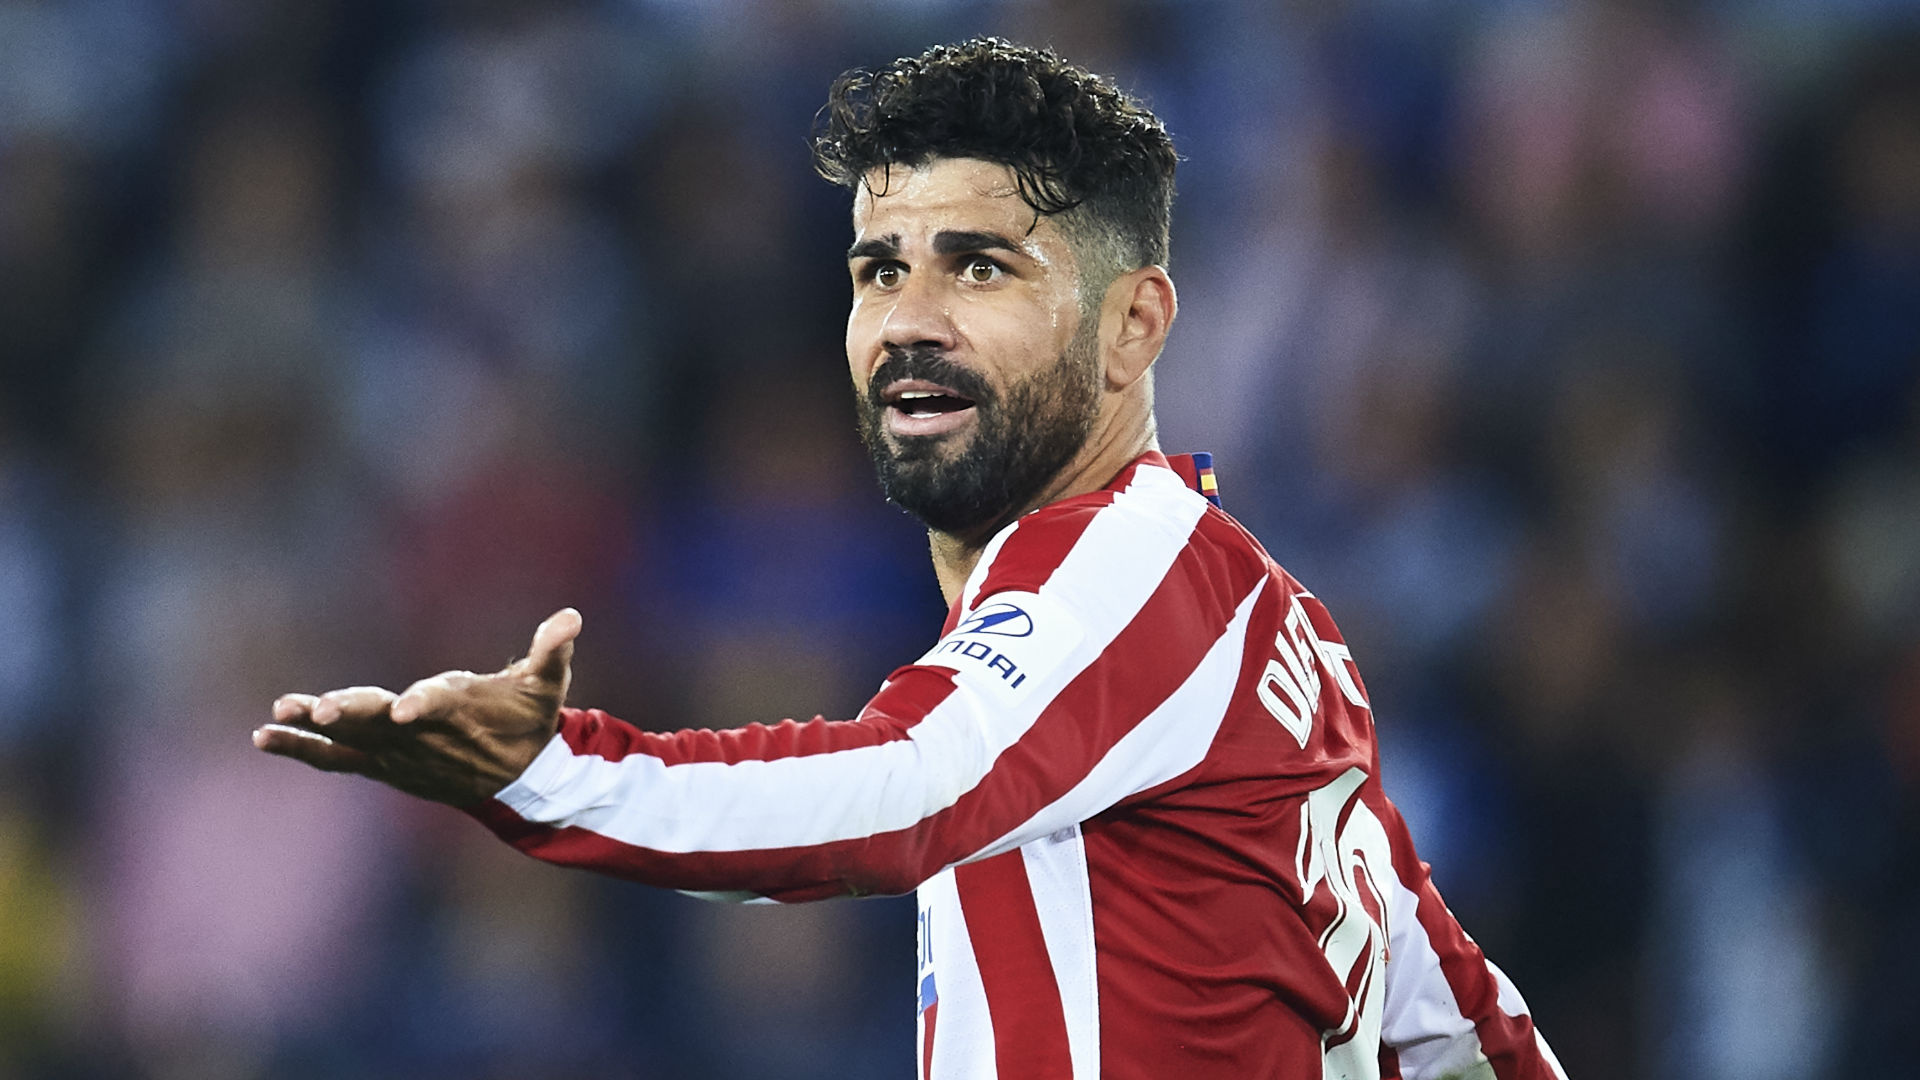 Diego Costa: A popular Spanish professional footballer who already has carved a position in the international football arena. 1920x1080 Full HD Background.